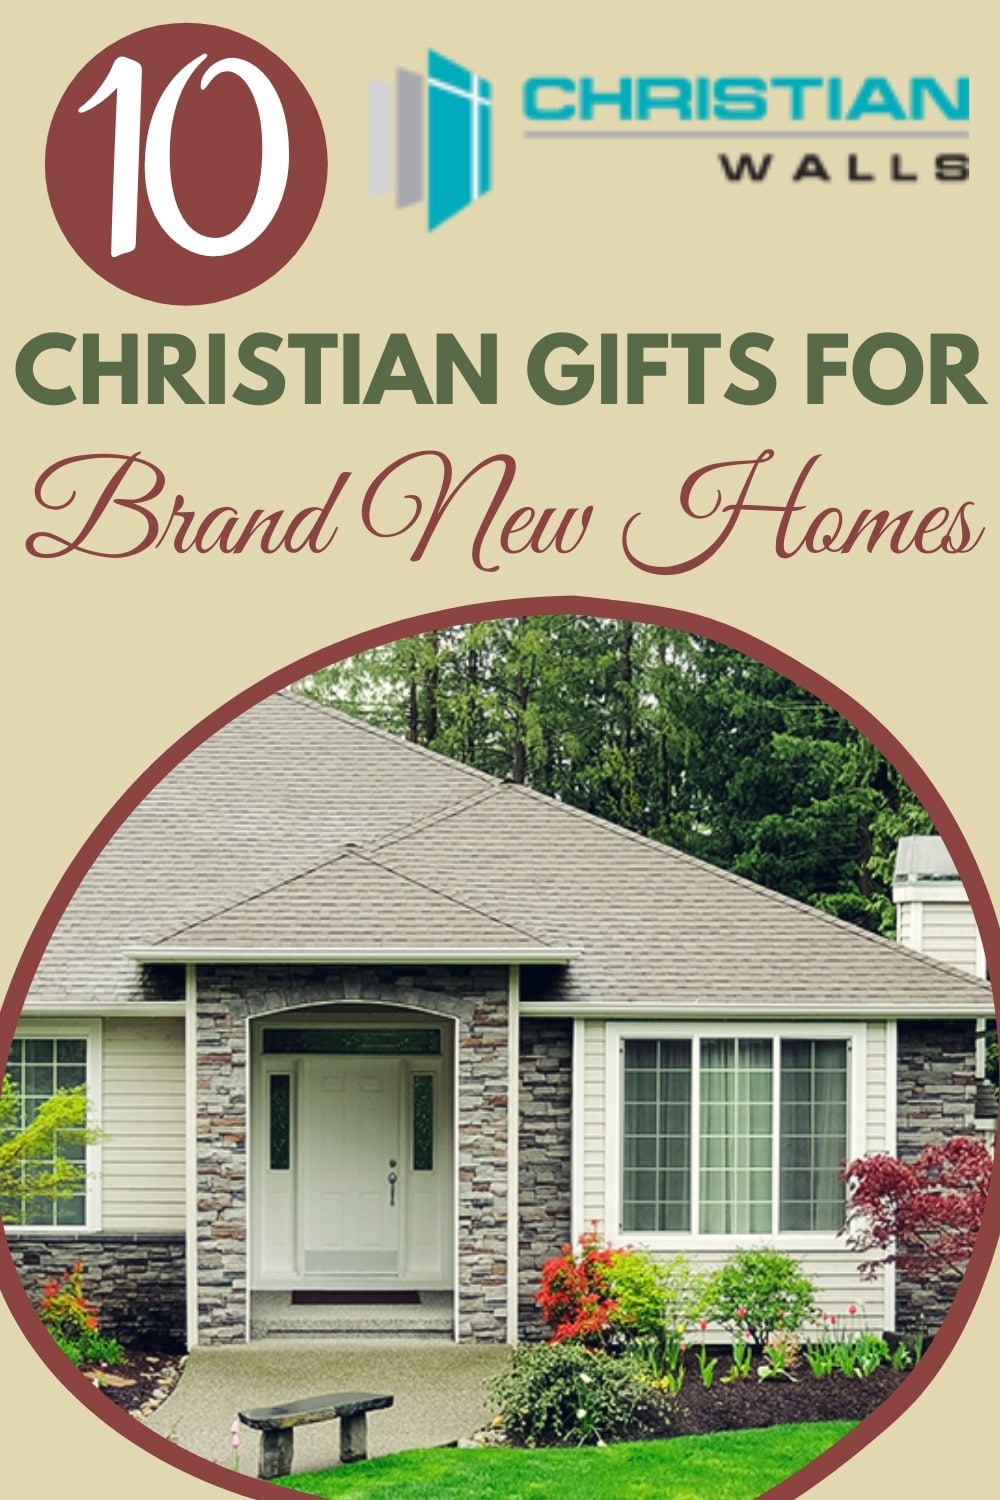 10 Christian Gifts for Brand New Homes – Christian Walls